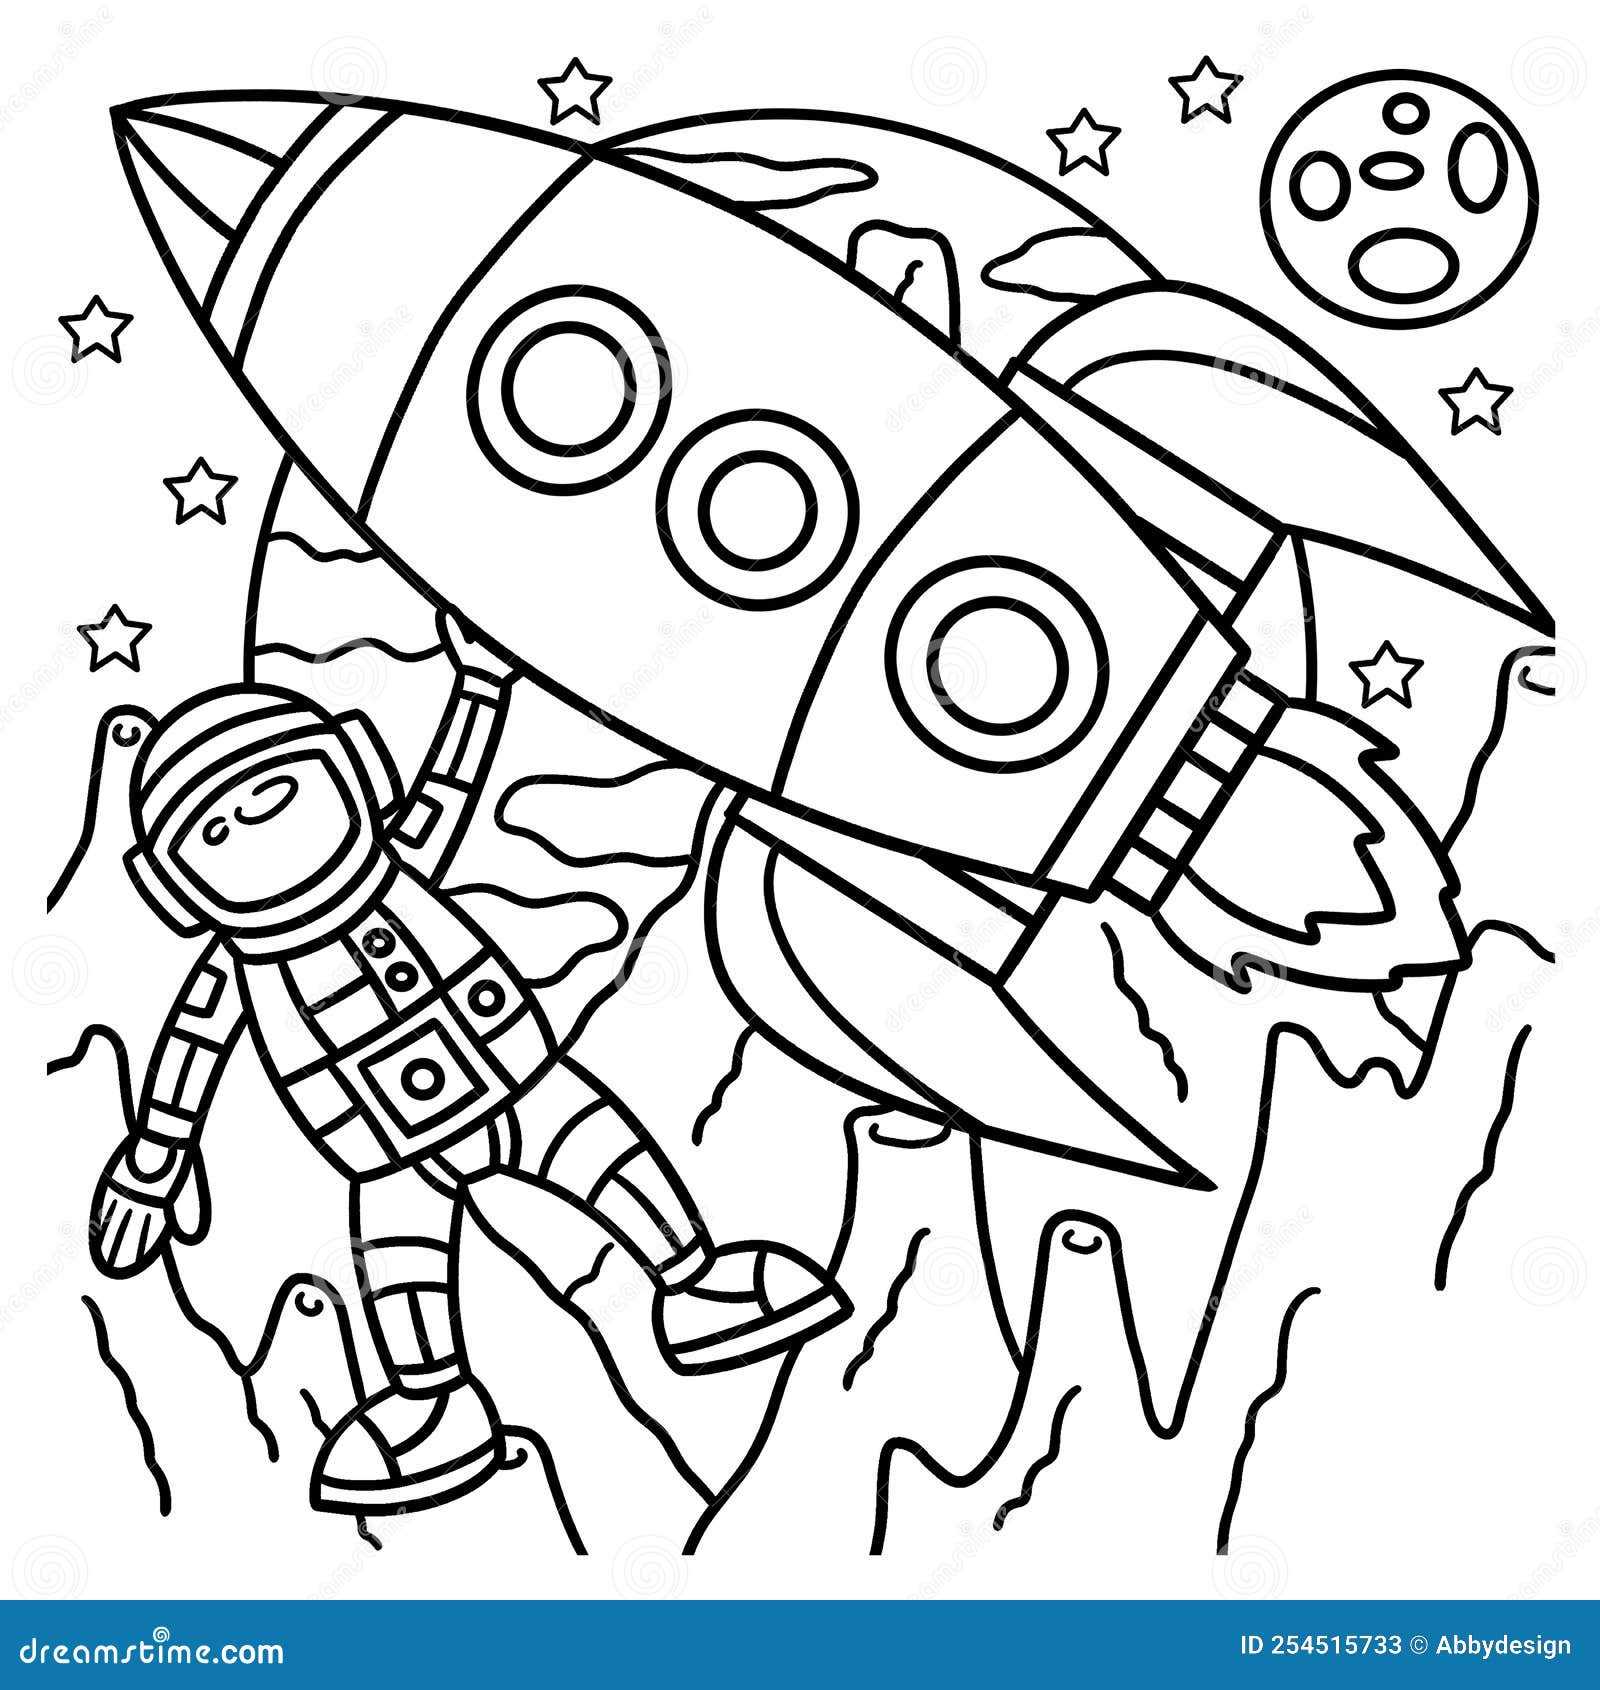 https://thumbs.dreamstime.com/z/astronaut-space-rocket-ship-coloring-page-kids-cute-funny-provides-hours-fun-children-color-very-easy-254515733.jpg